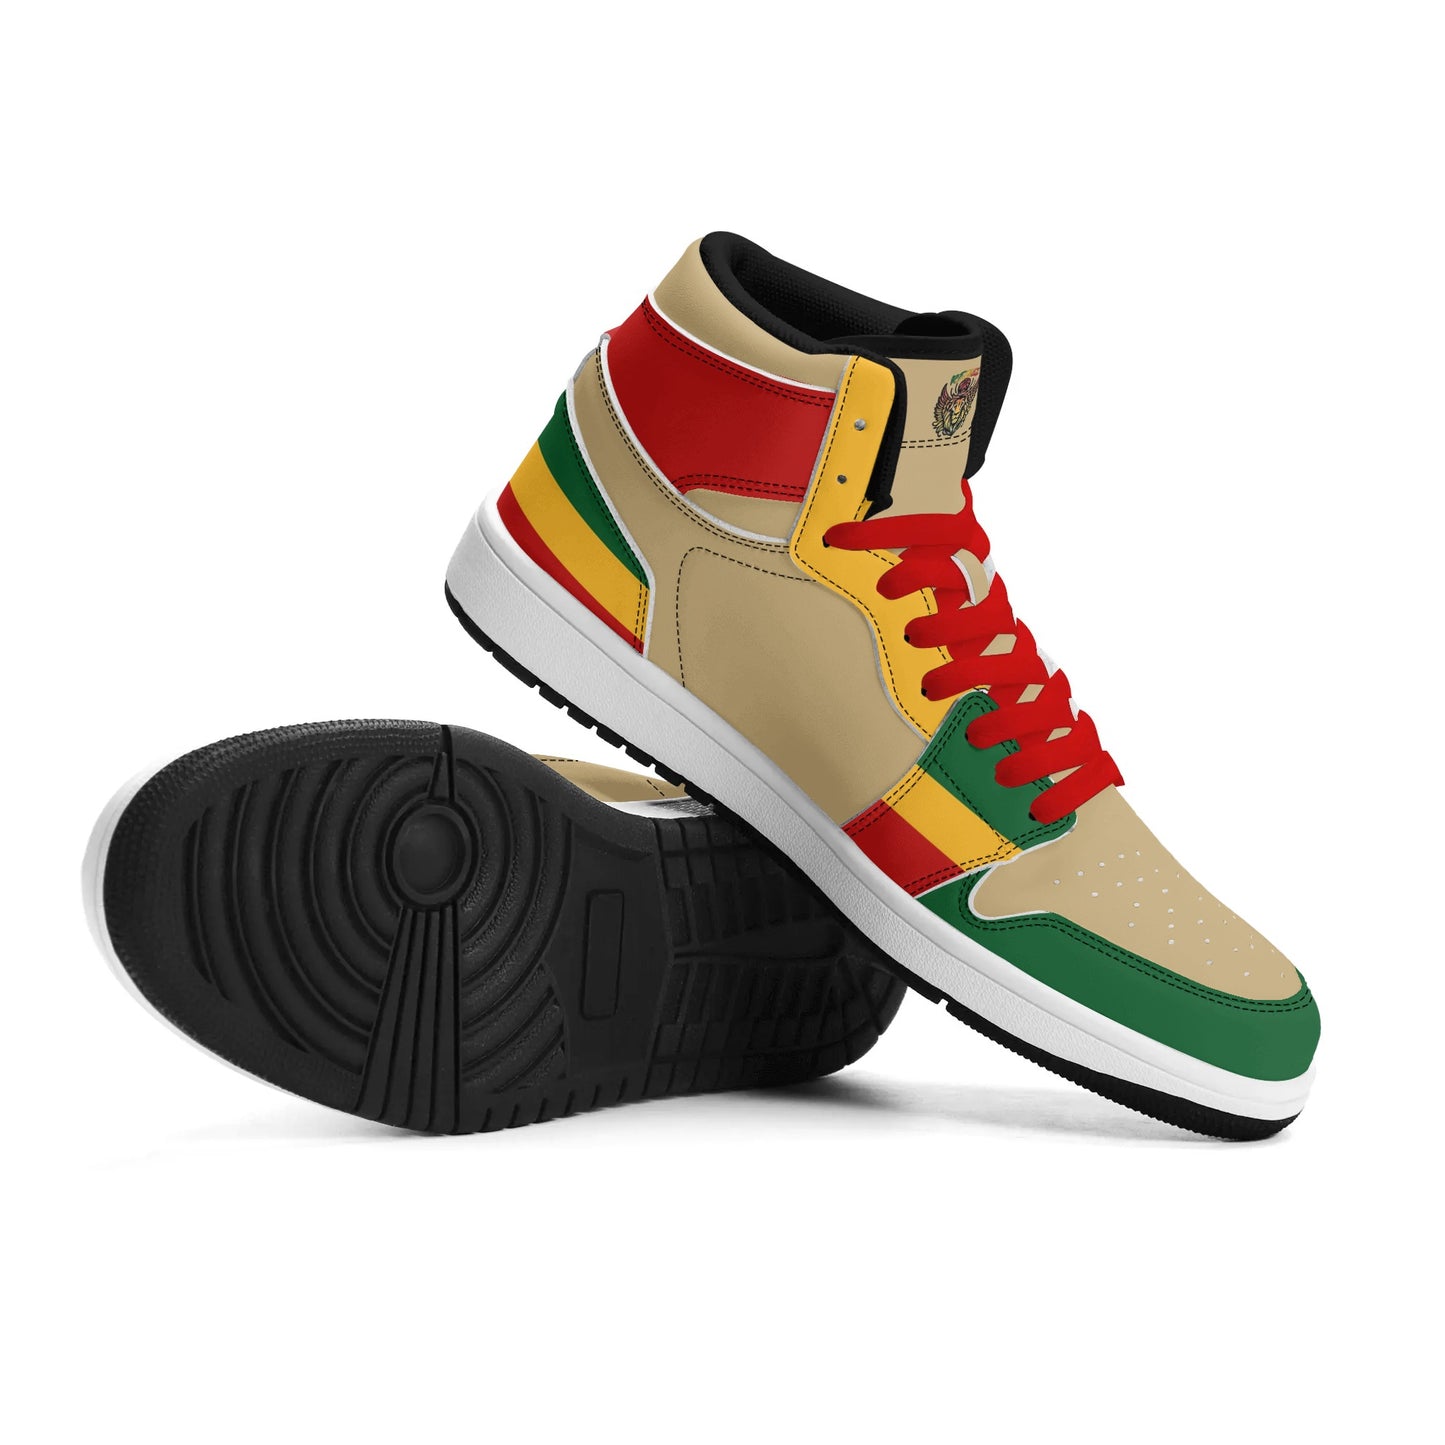 Rasta Mens Shoes, Womens Rasta Shoes, Jamaican Colors Shoes on a white background as a product mockup.